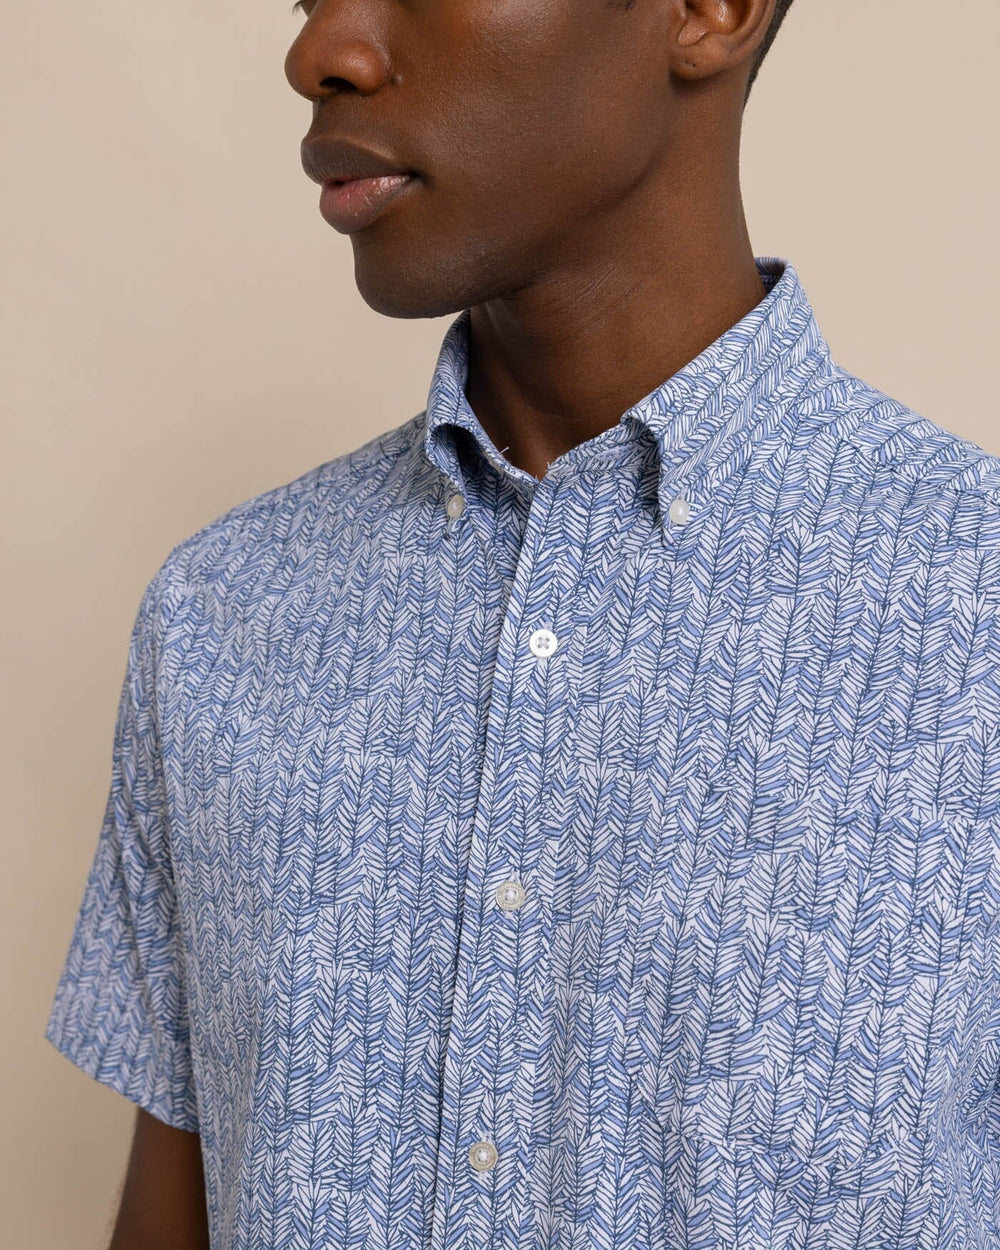 The detail view of the Southern Tide Leagally Frond Intercoastal Short Sleeve Sport Shirt by Southern Tide - Eternal Blue